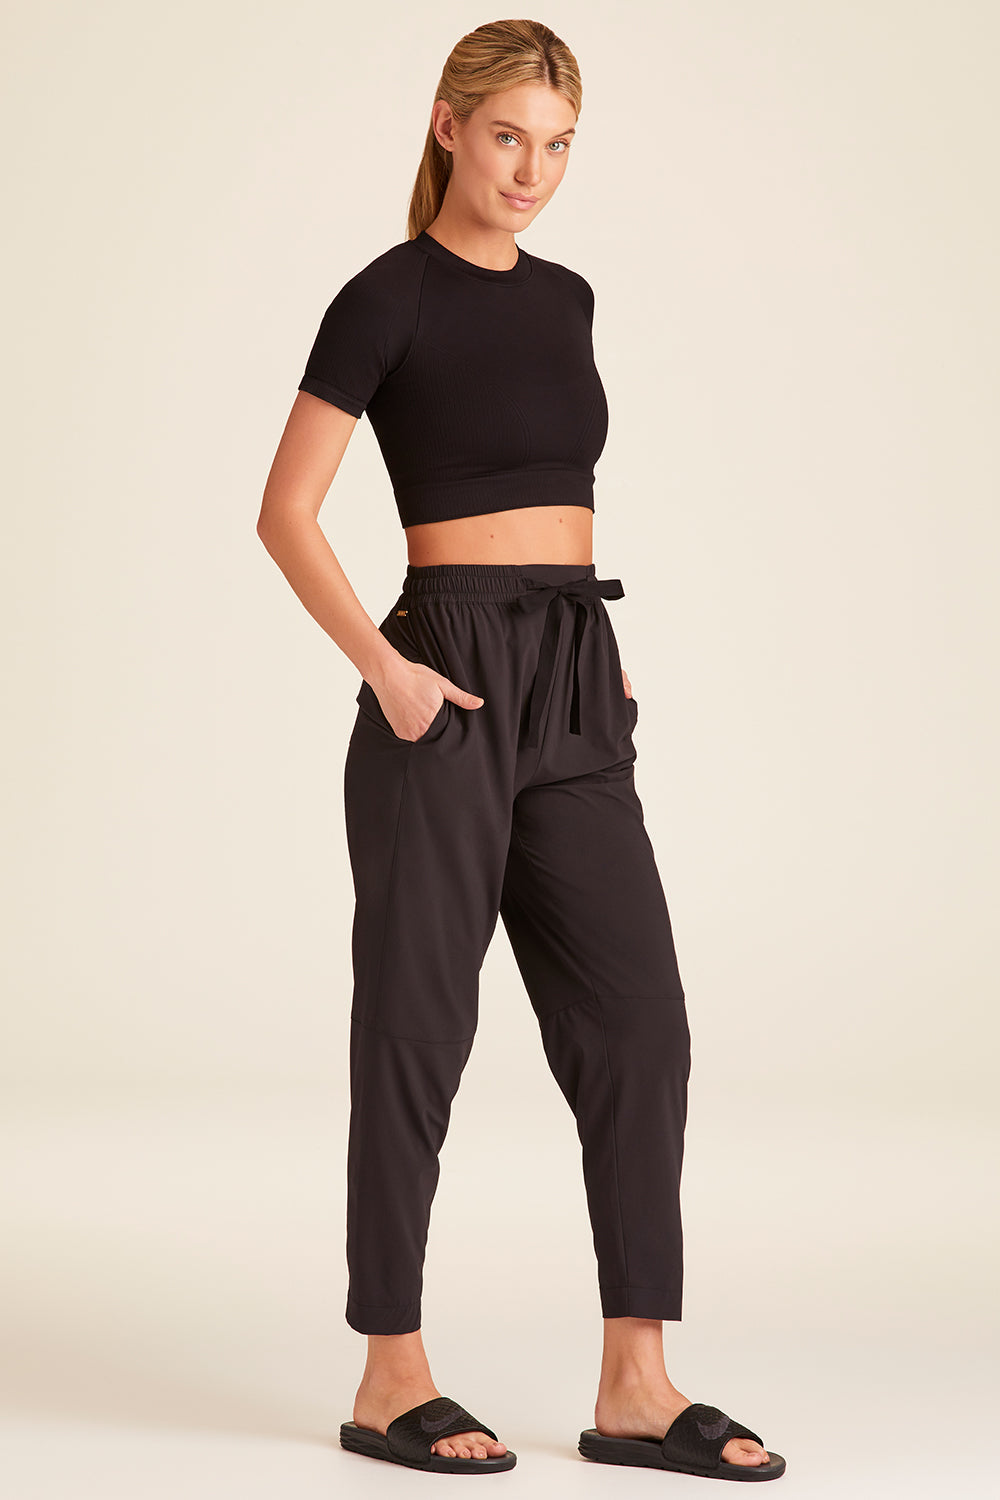 Commuter Pant - Black Elevated Pants, High Waisted Pants Women